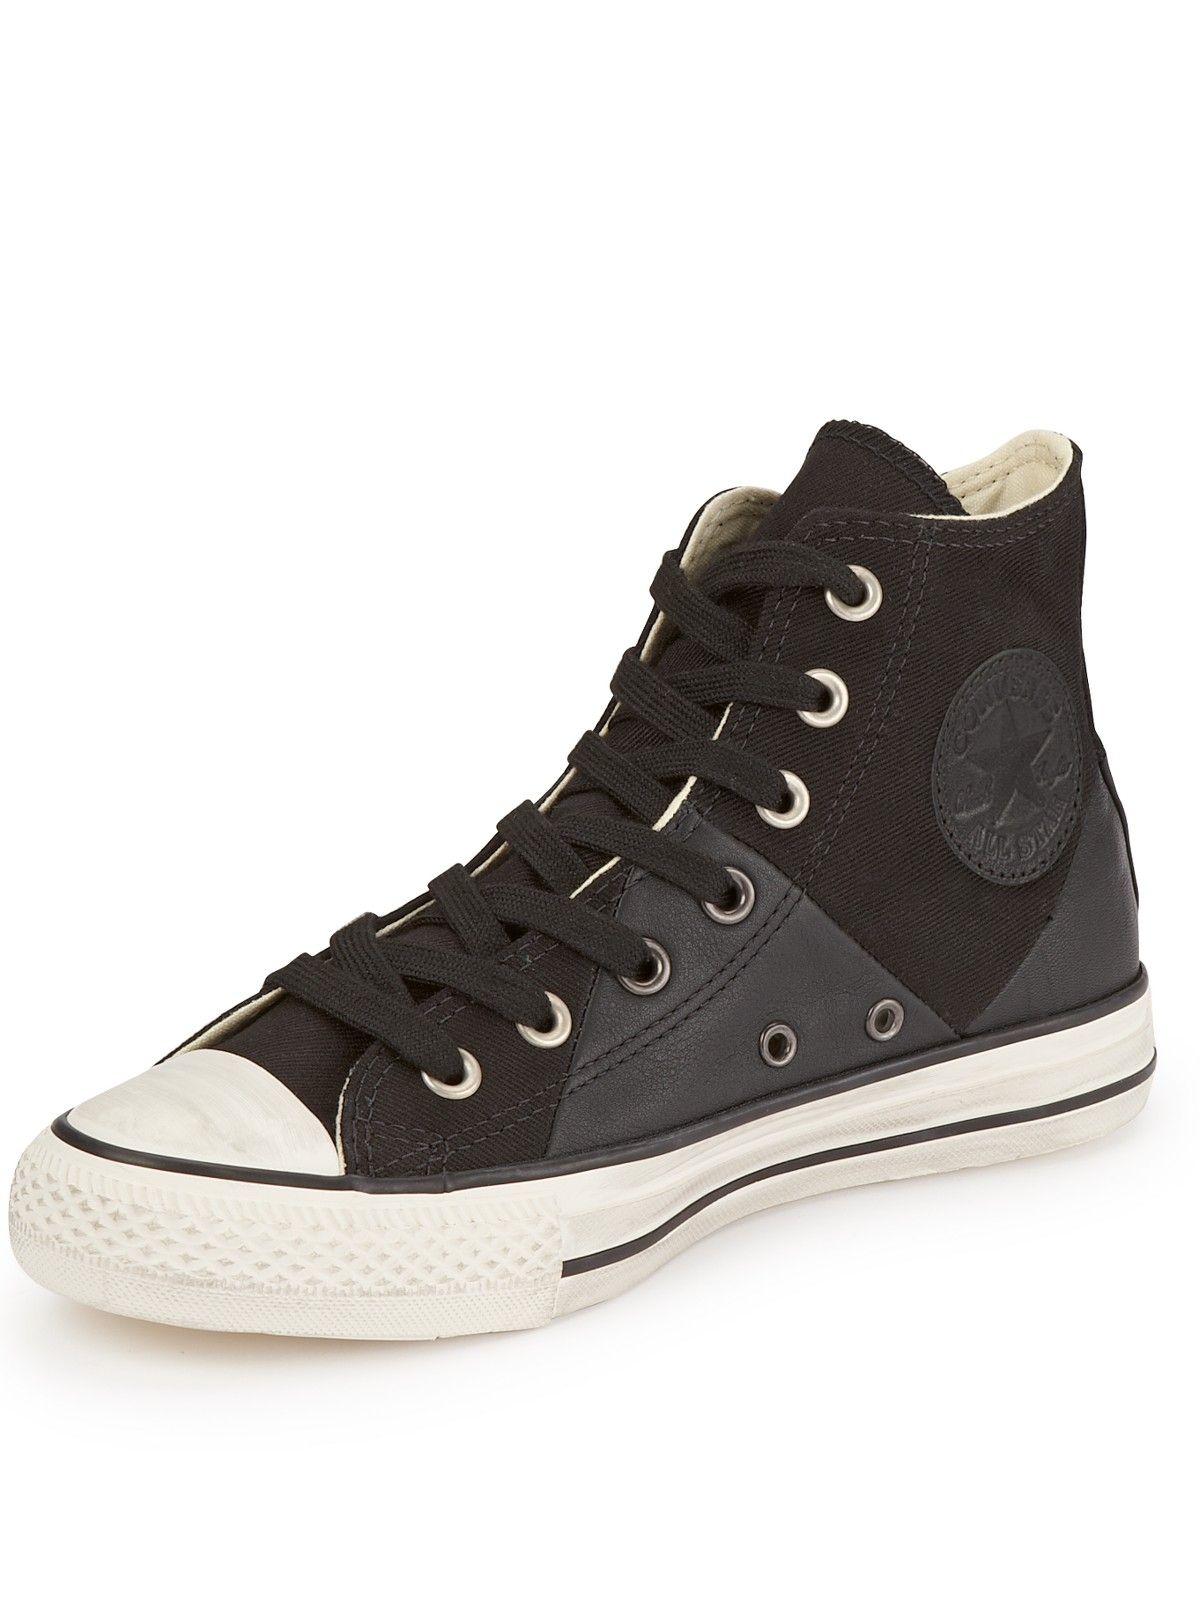 Converse Chuck Taylor All Star Multi Panel Elevated Silver Studs Hitops ...